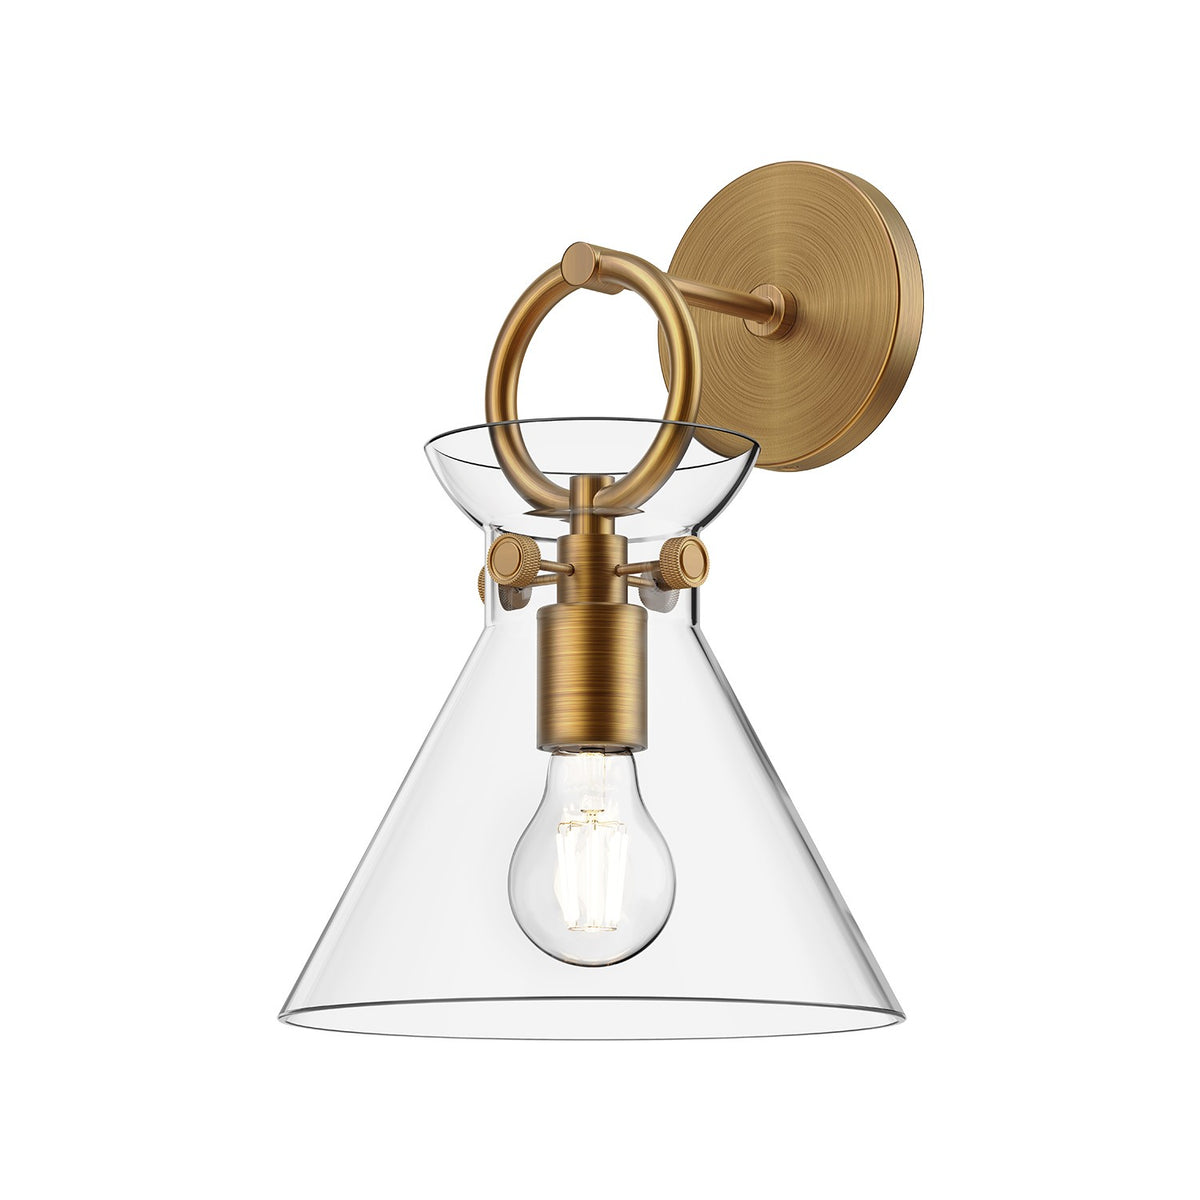 Alora Canada - WV412509AGCL - One Light Wall Sconce - Emerson - Aged Gold/Clear Glass